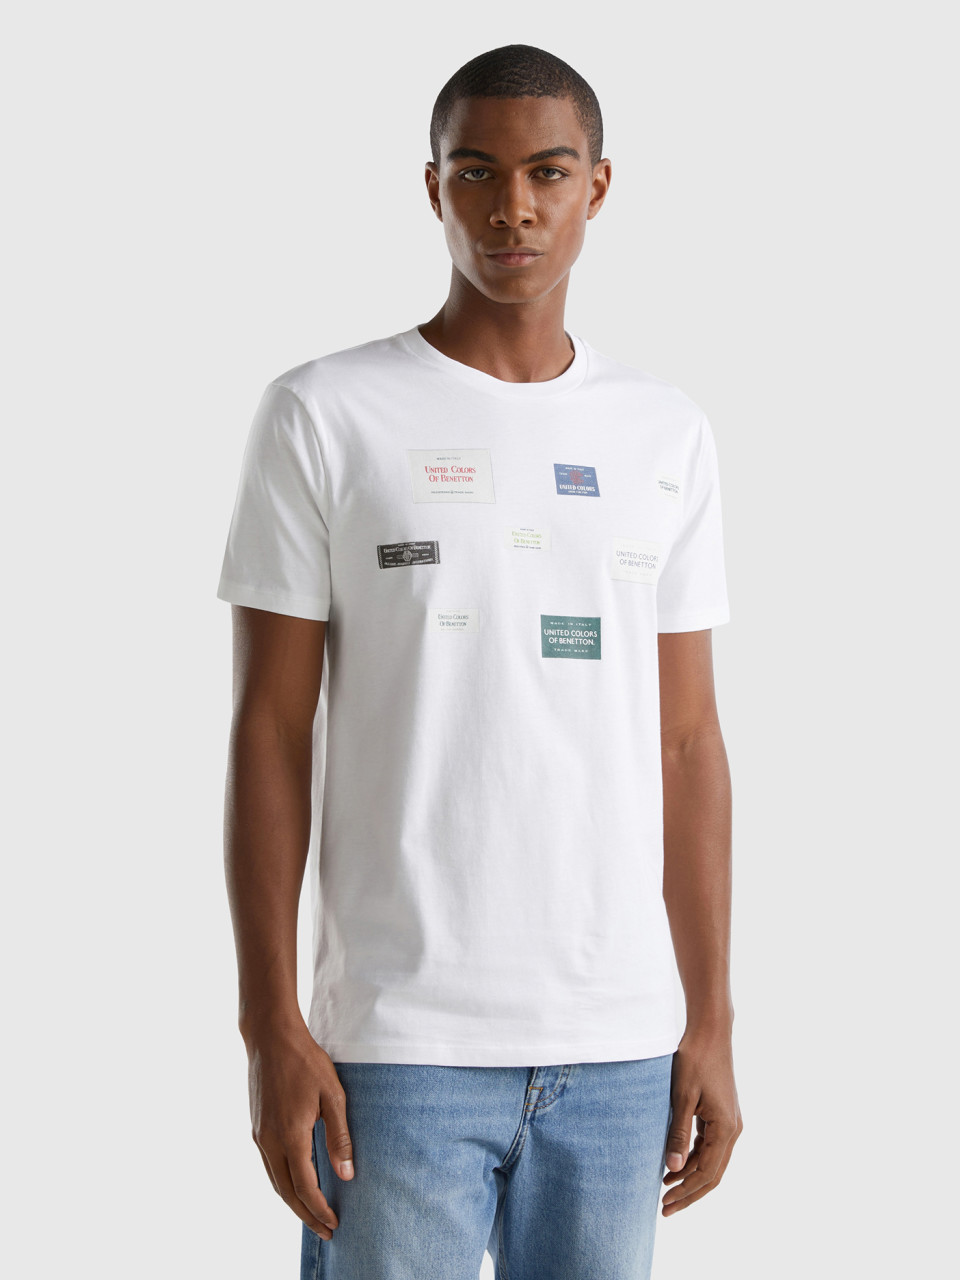 Benetton, Relaxed Fit T-shirt With Print, White, Men